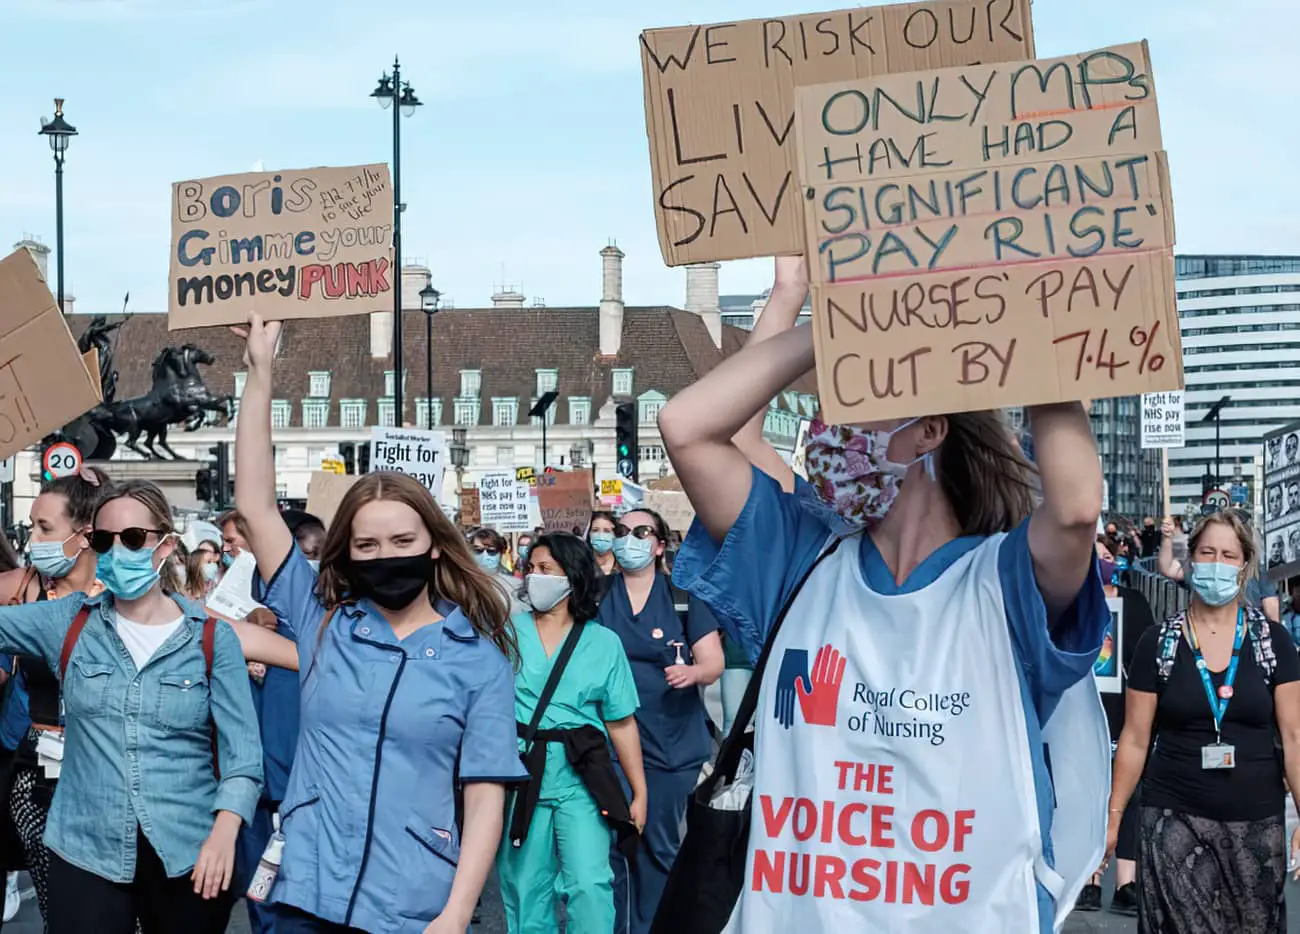 Nurses on protest march